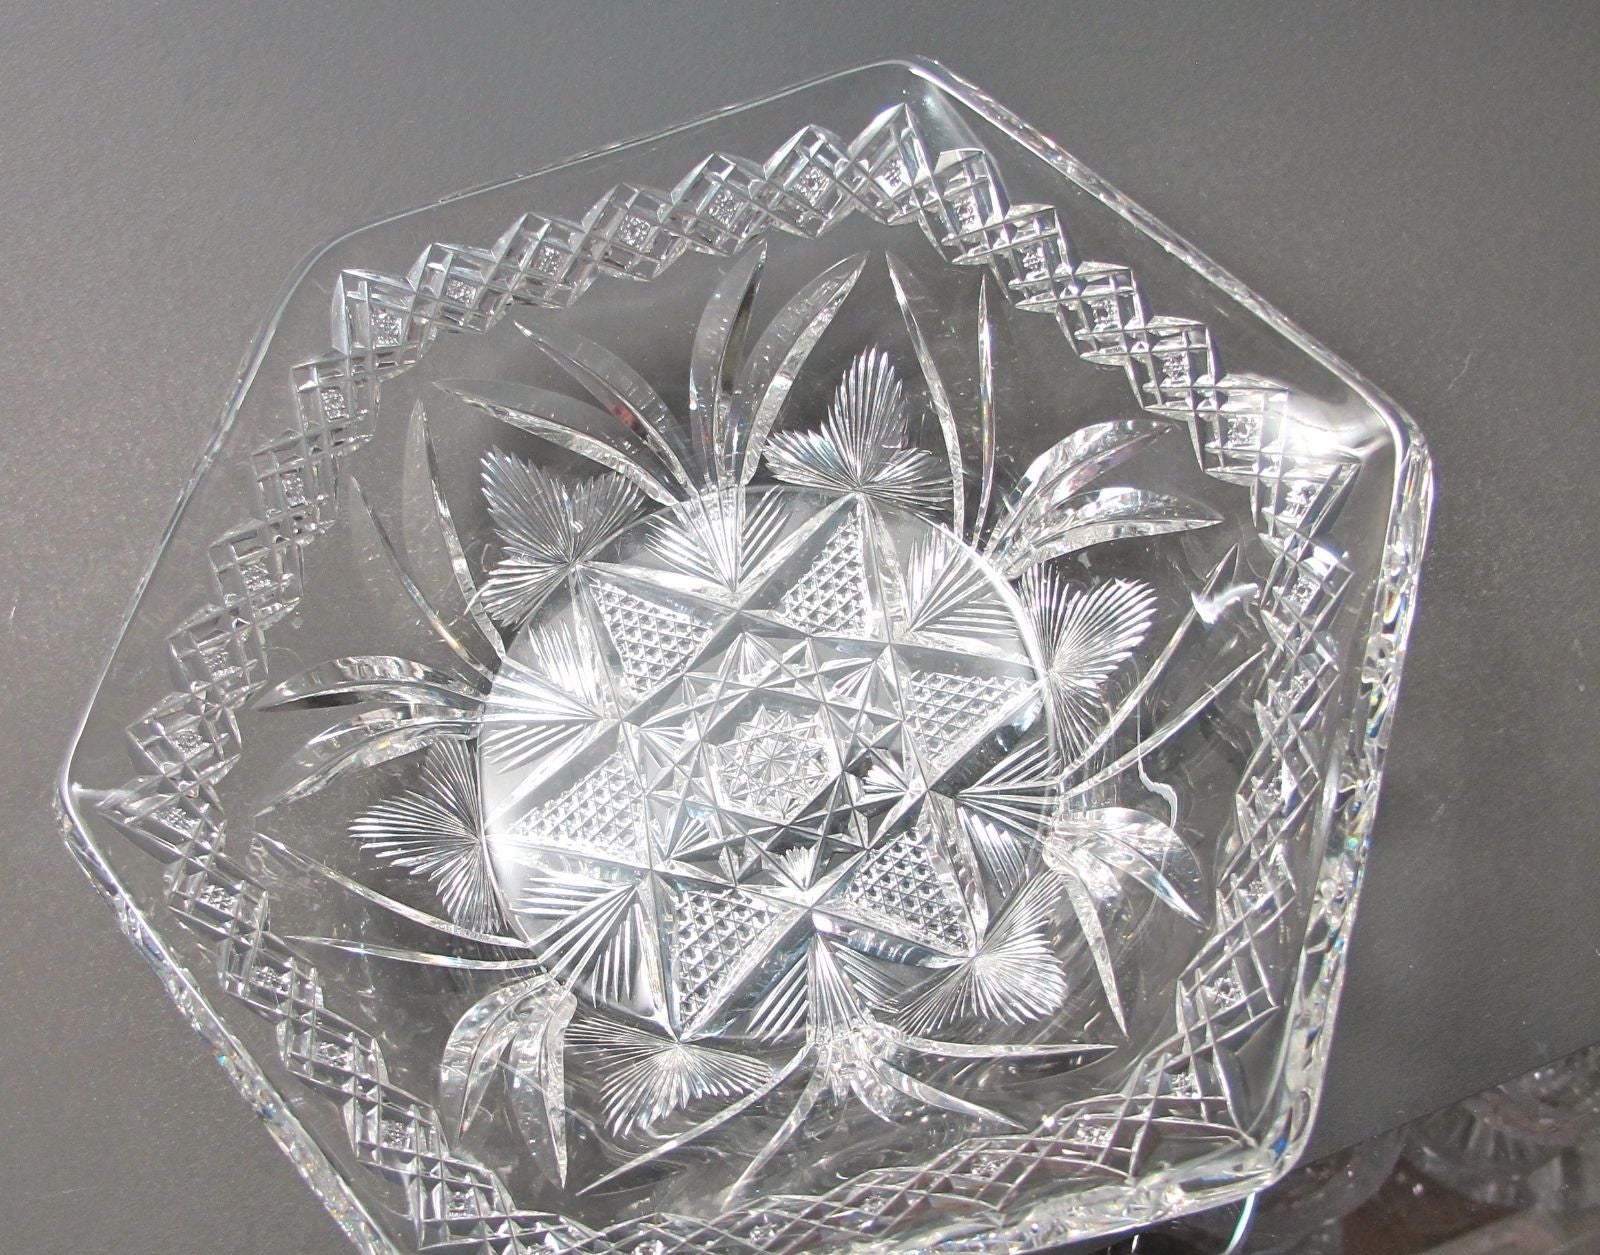 Signed Libbey American Brilliant Period Cut Glass 6 sided bowl  ABP  Antique - O'Rourke crystal awards & gifts abp cut glass